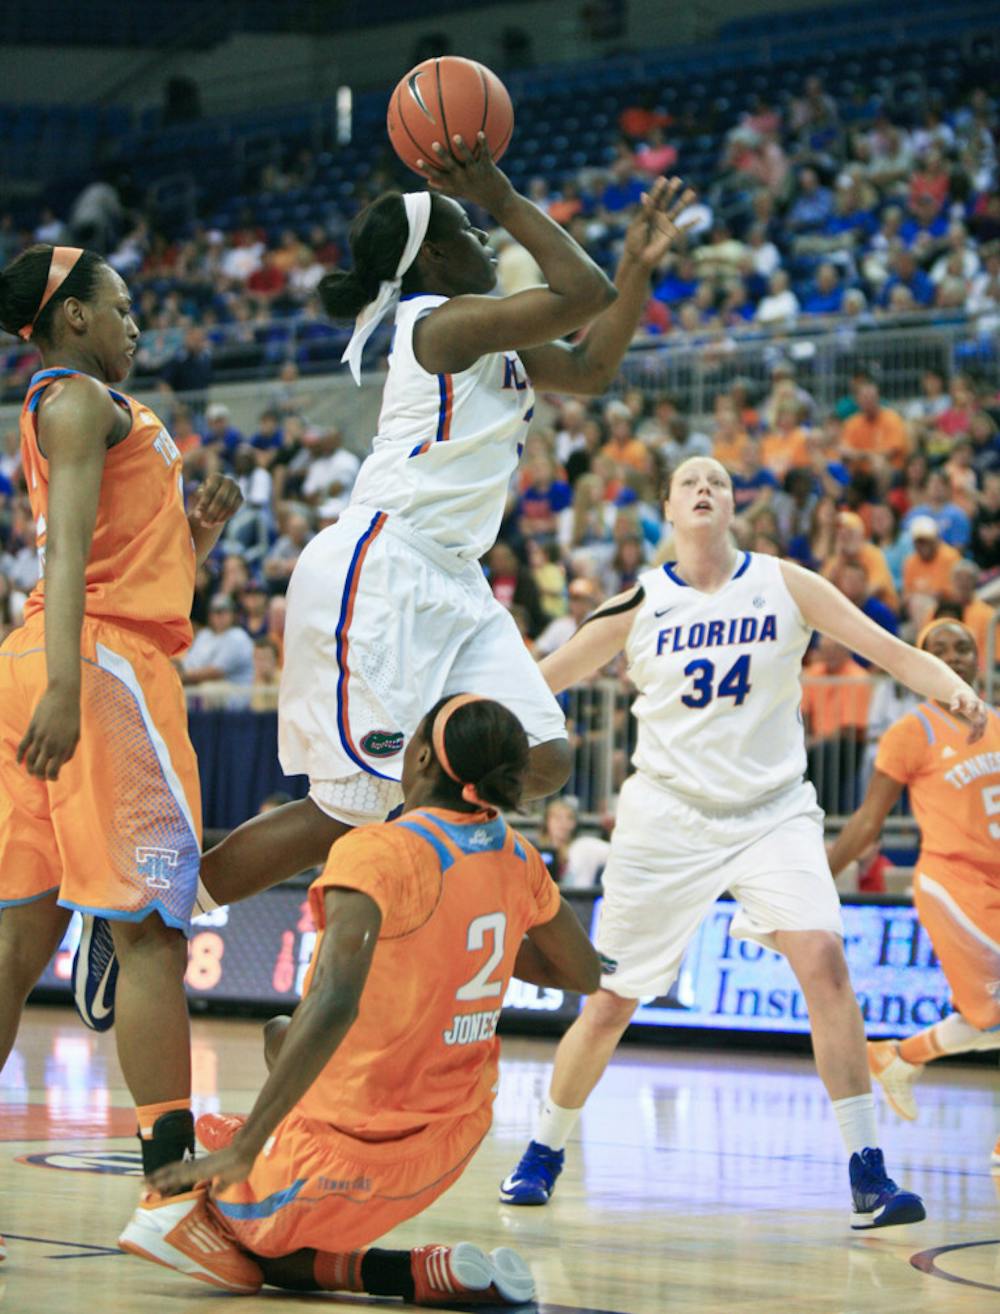 <p><span>January Miller (right) attempts a shot during Florida’s 78-75 overtime loss to Tennessee on Sunday at home.</span></p>
<div><span><br /></span></div>